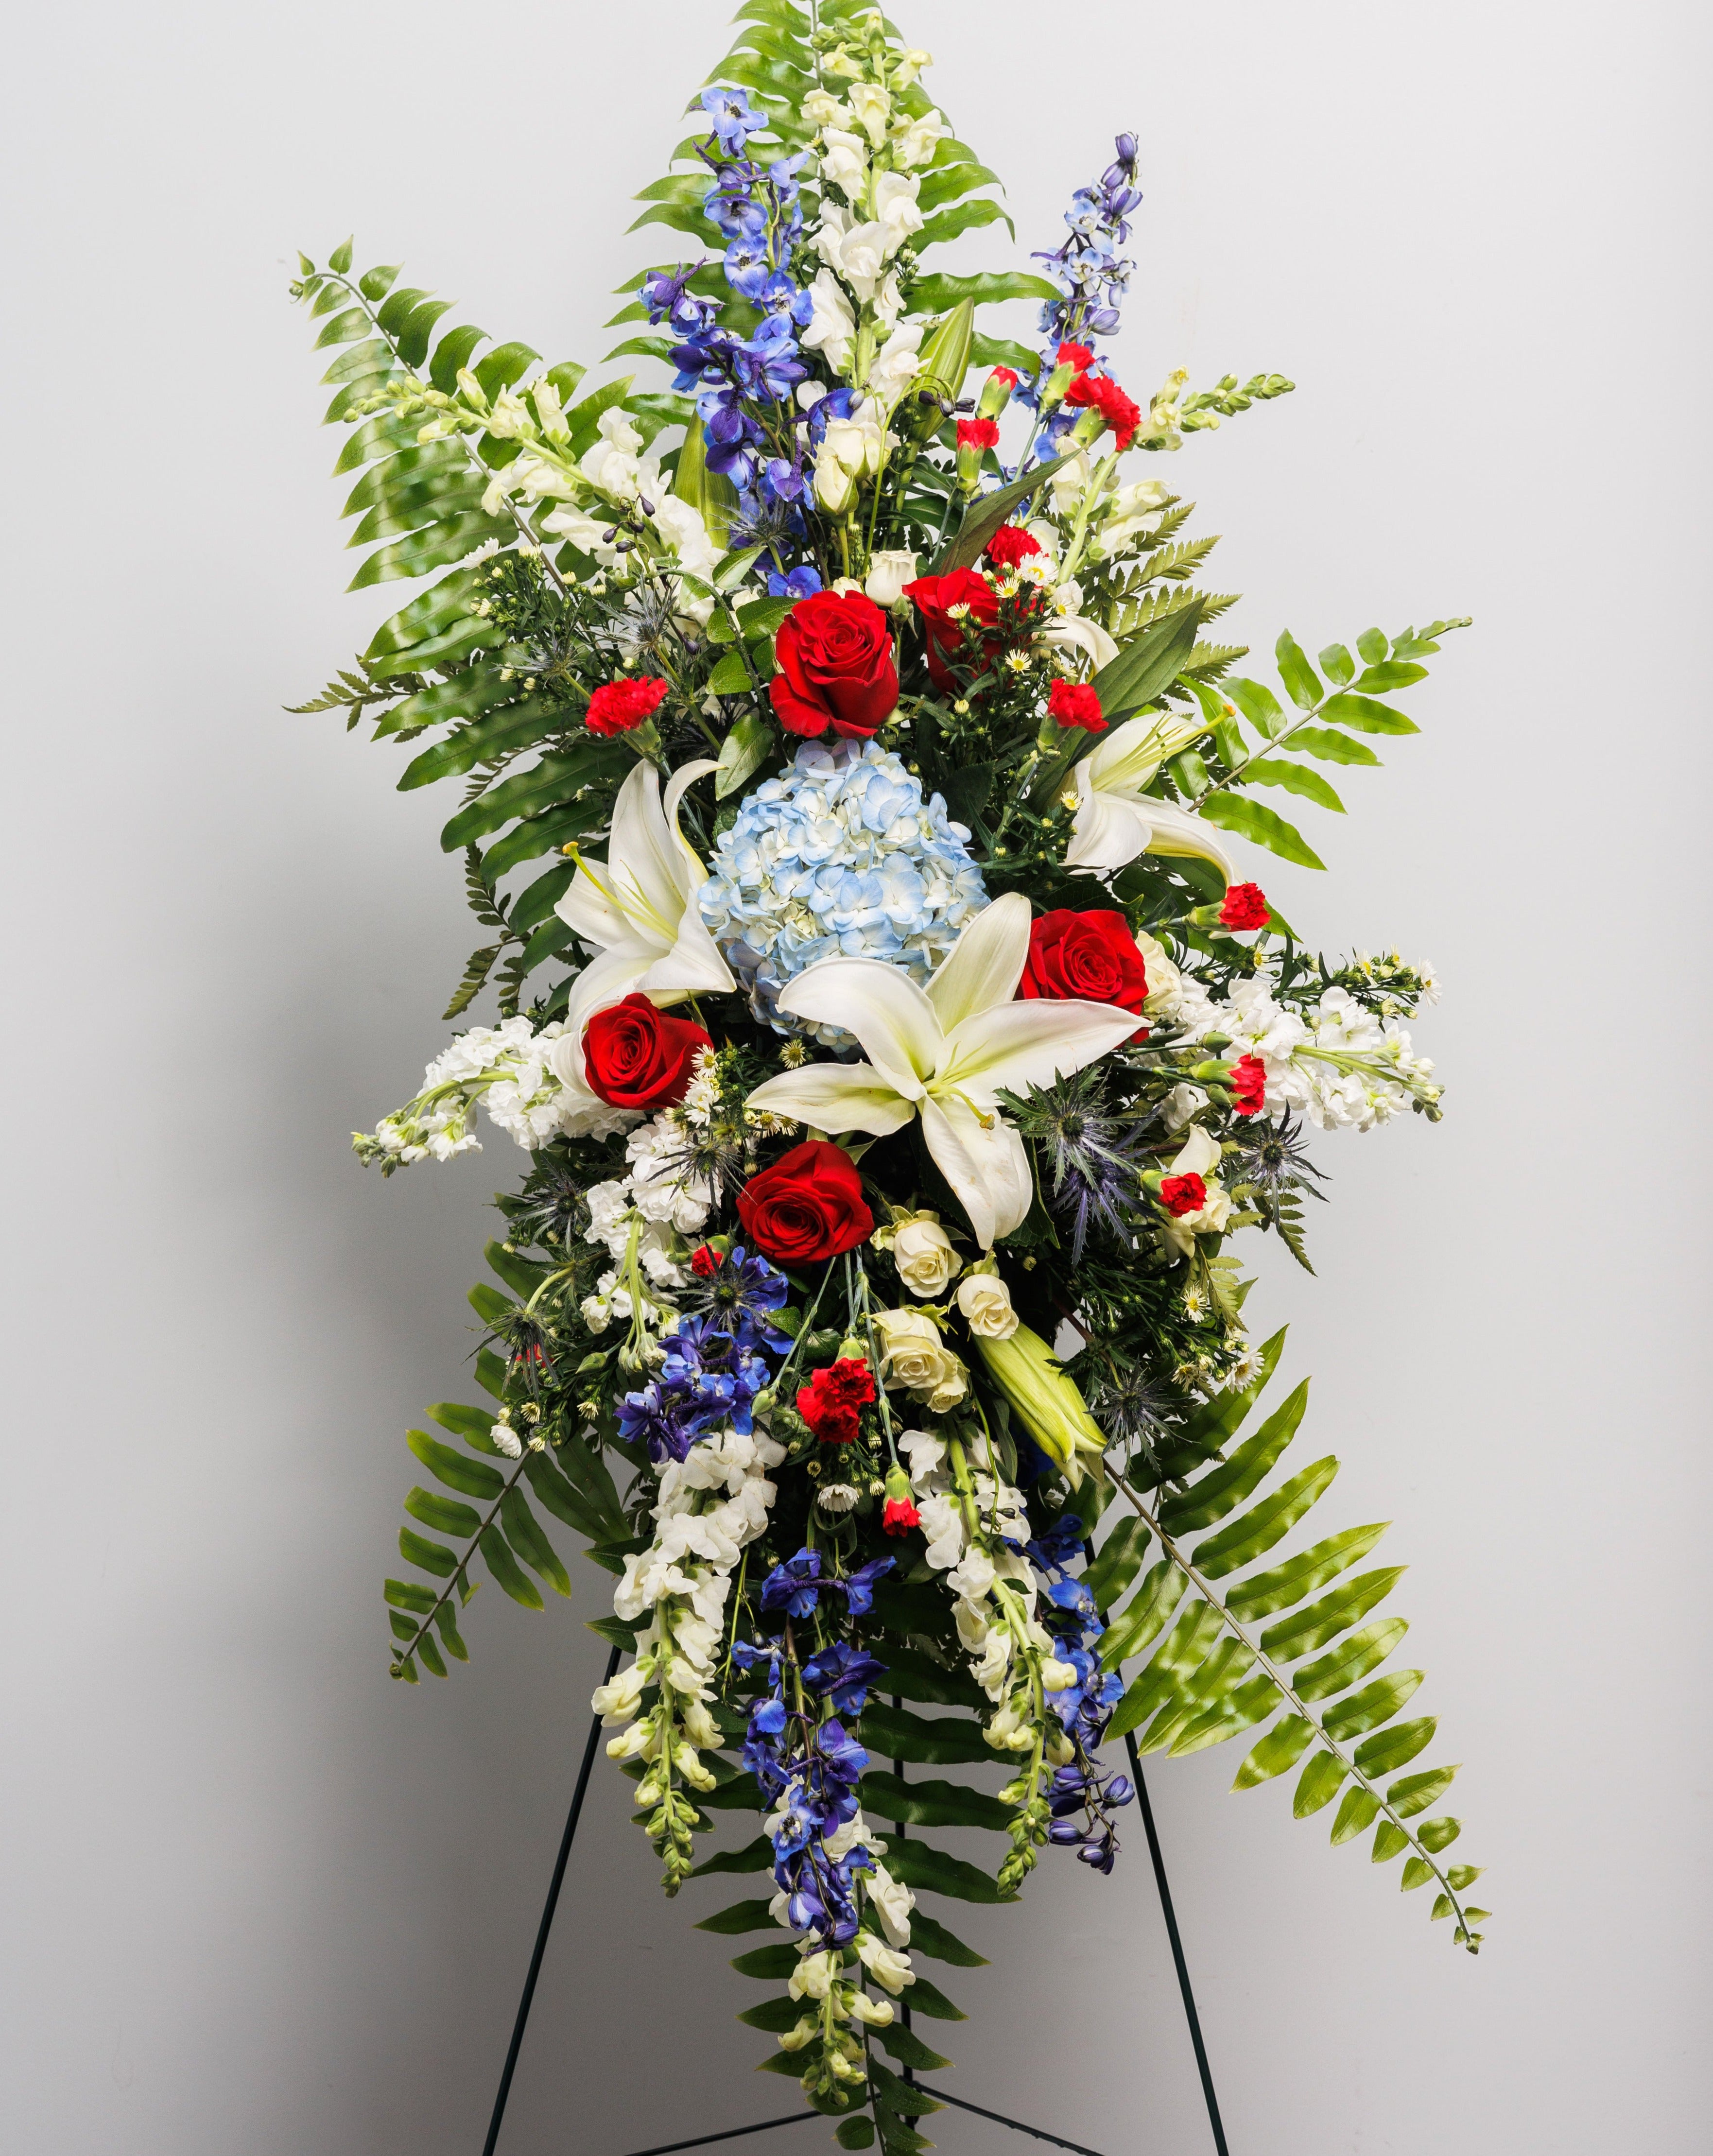 A patriotic standing spray with red, white and blue flowers.